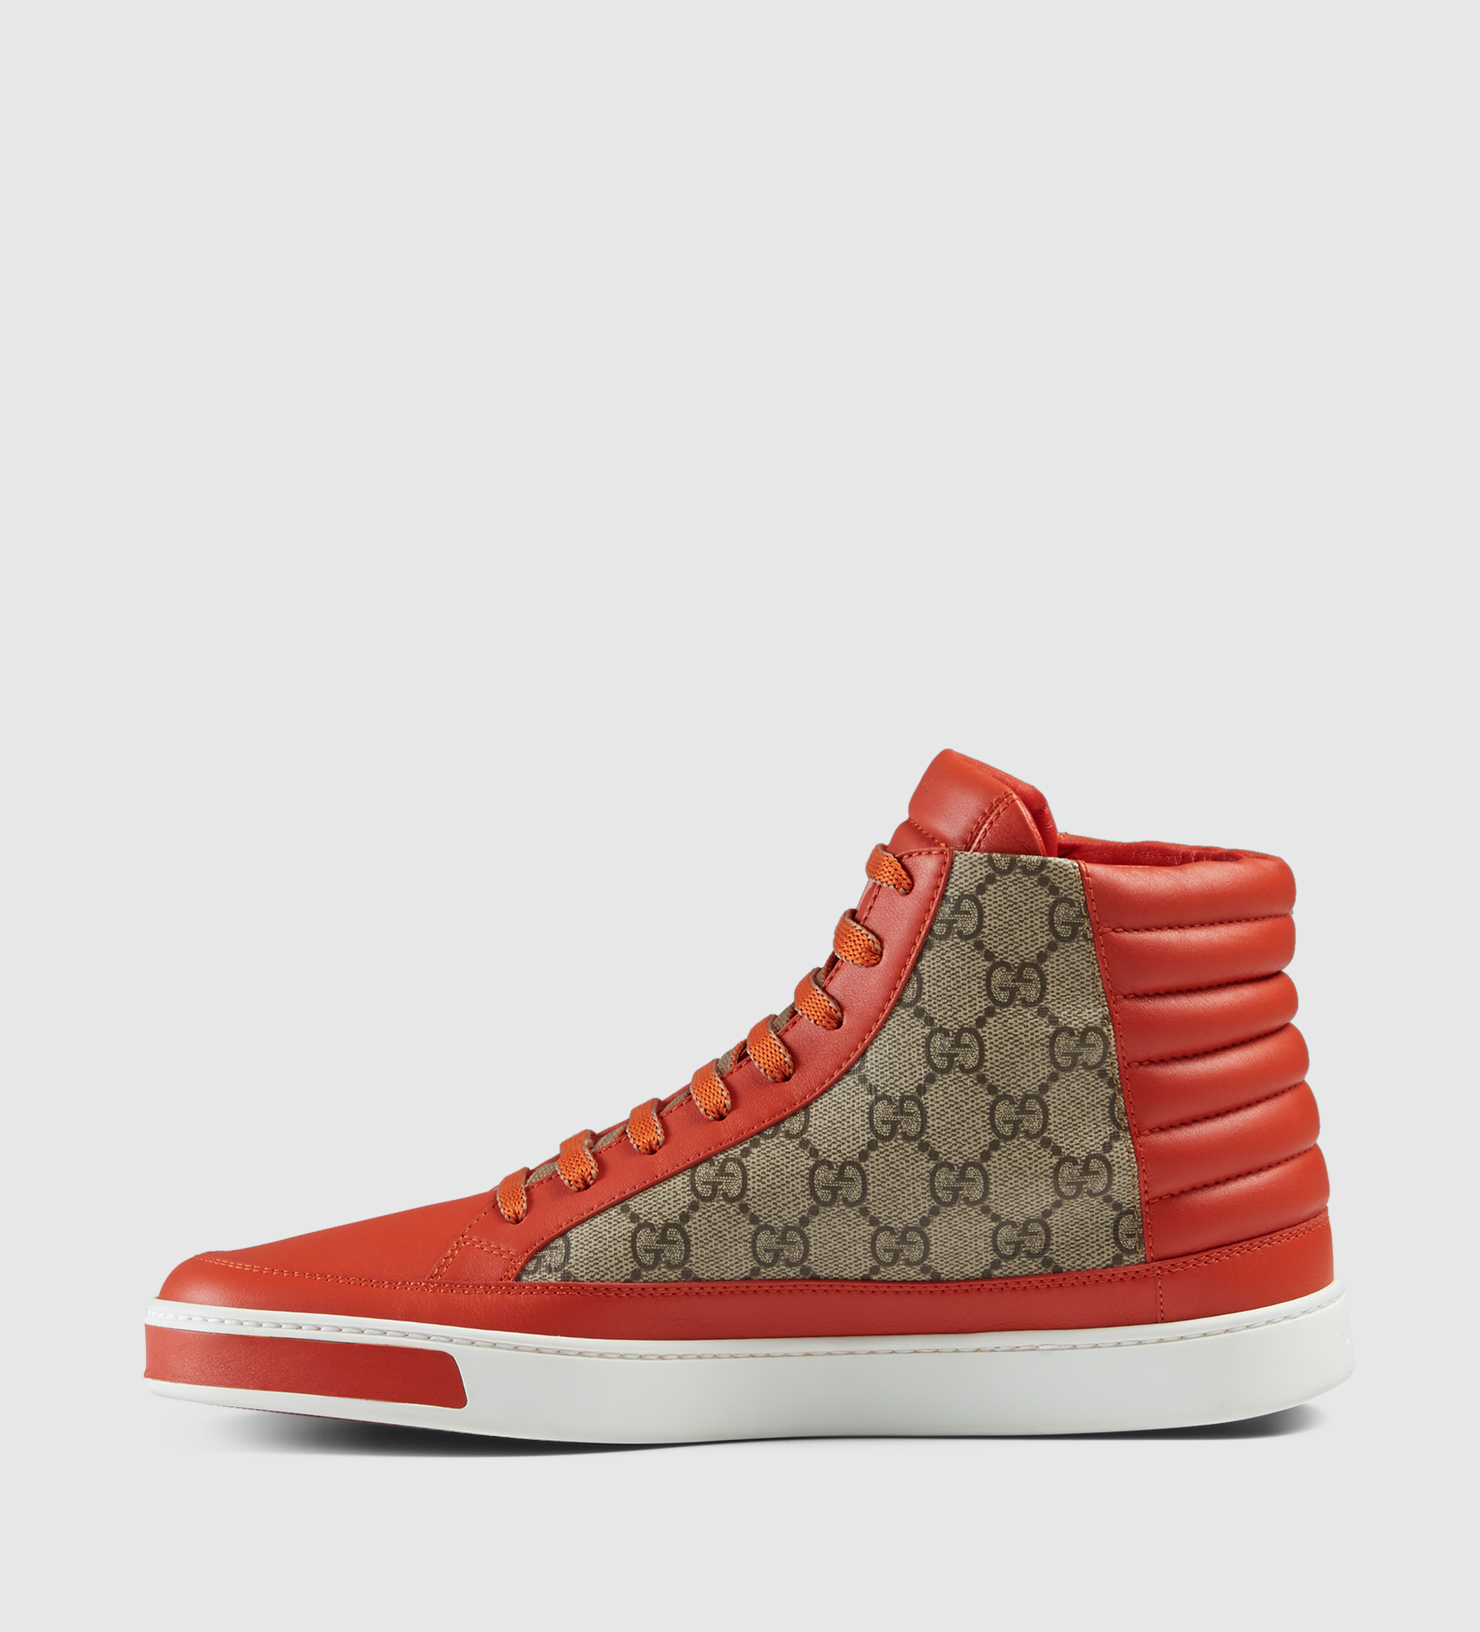 Gucci Gg Supreme And Leather High-top Sneaker in Orange for Men | Lyst